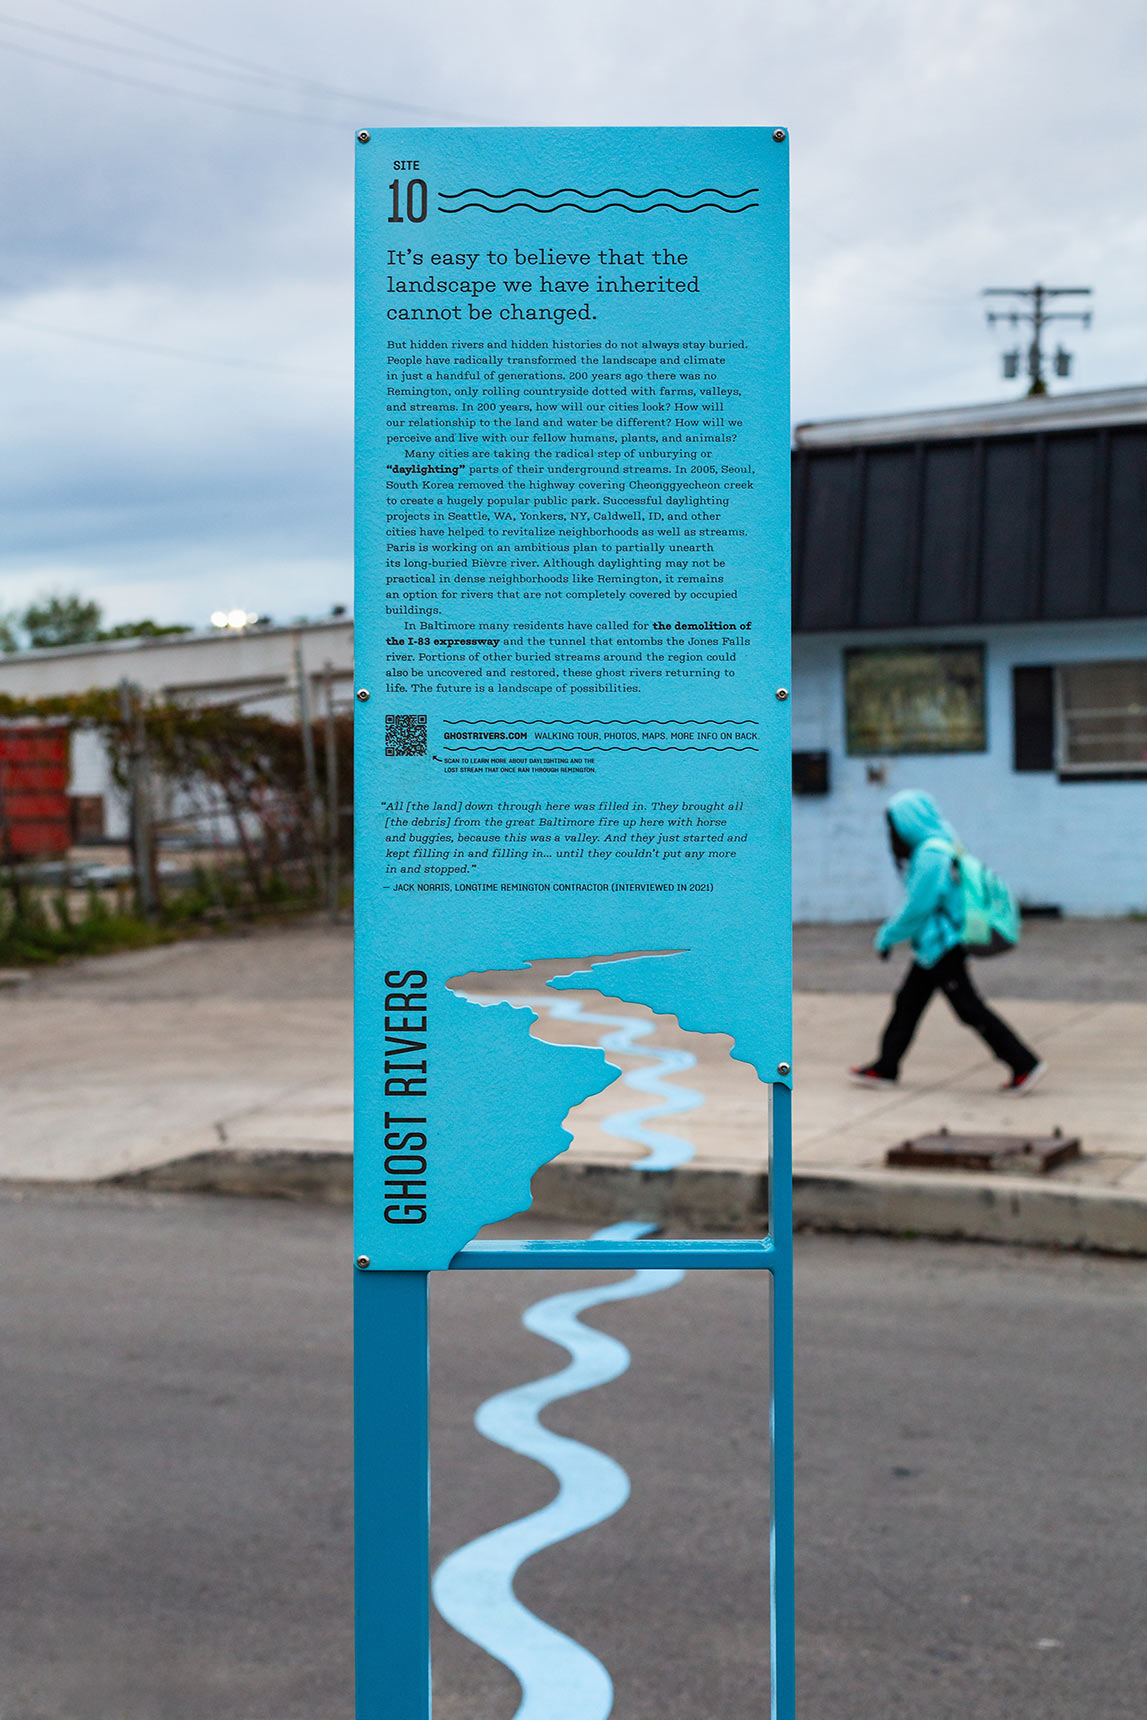 Photo of a public art installation mapping the path of an underground stream onto the pavement, showing a tall blue interpretive sign, with the form of a river cut out from the bottom of the sign panel. Through the gap in the sign, a bright blue wavy line snakes across the street.